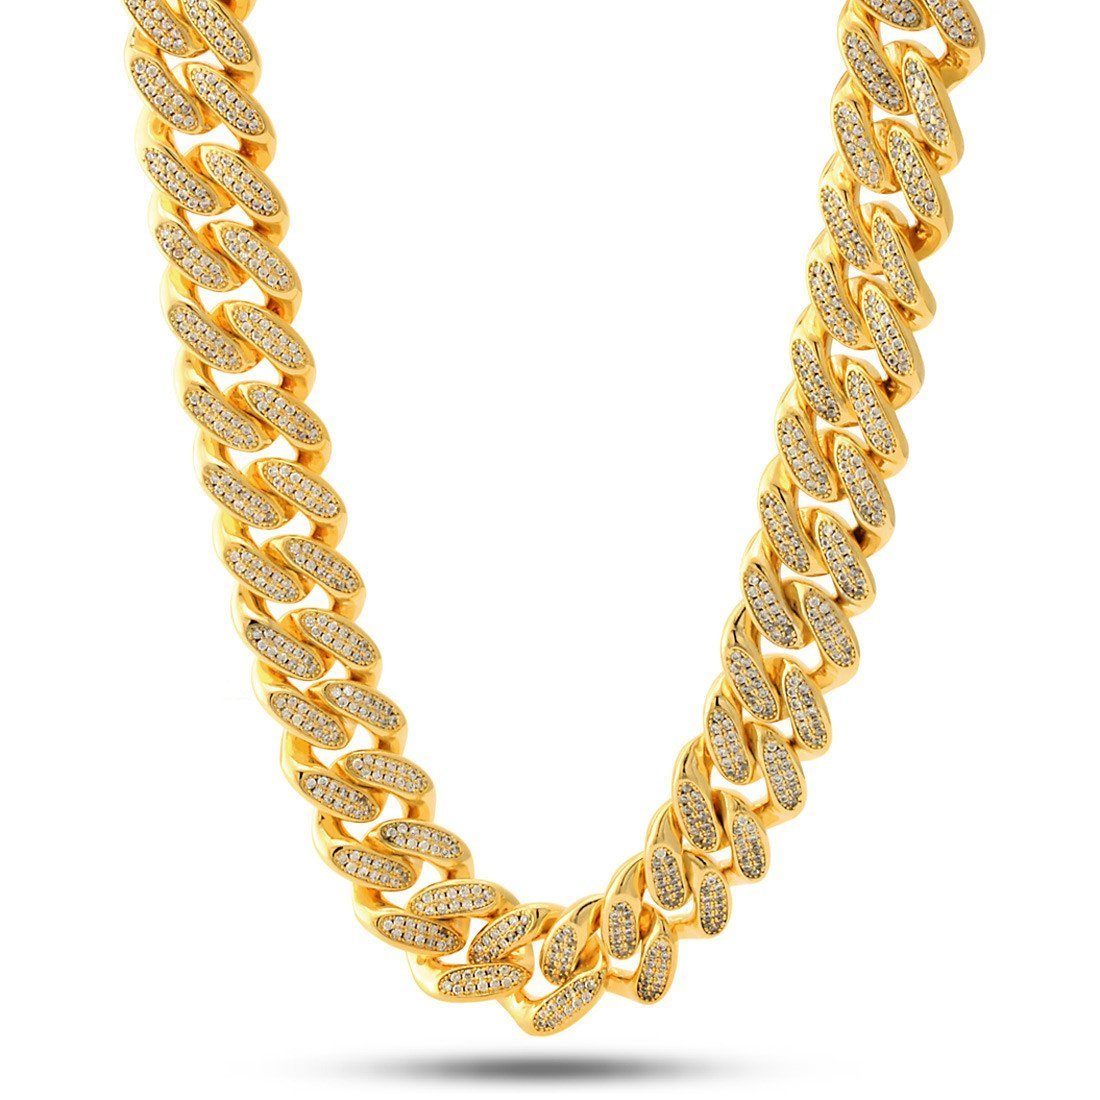 Gold Plated / 14K Gold / 18" 18mm Classic Iced Miami Cuban Chain CHX11381-Gold-18-sale